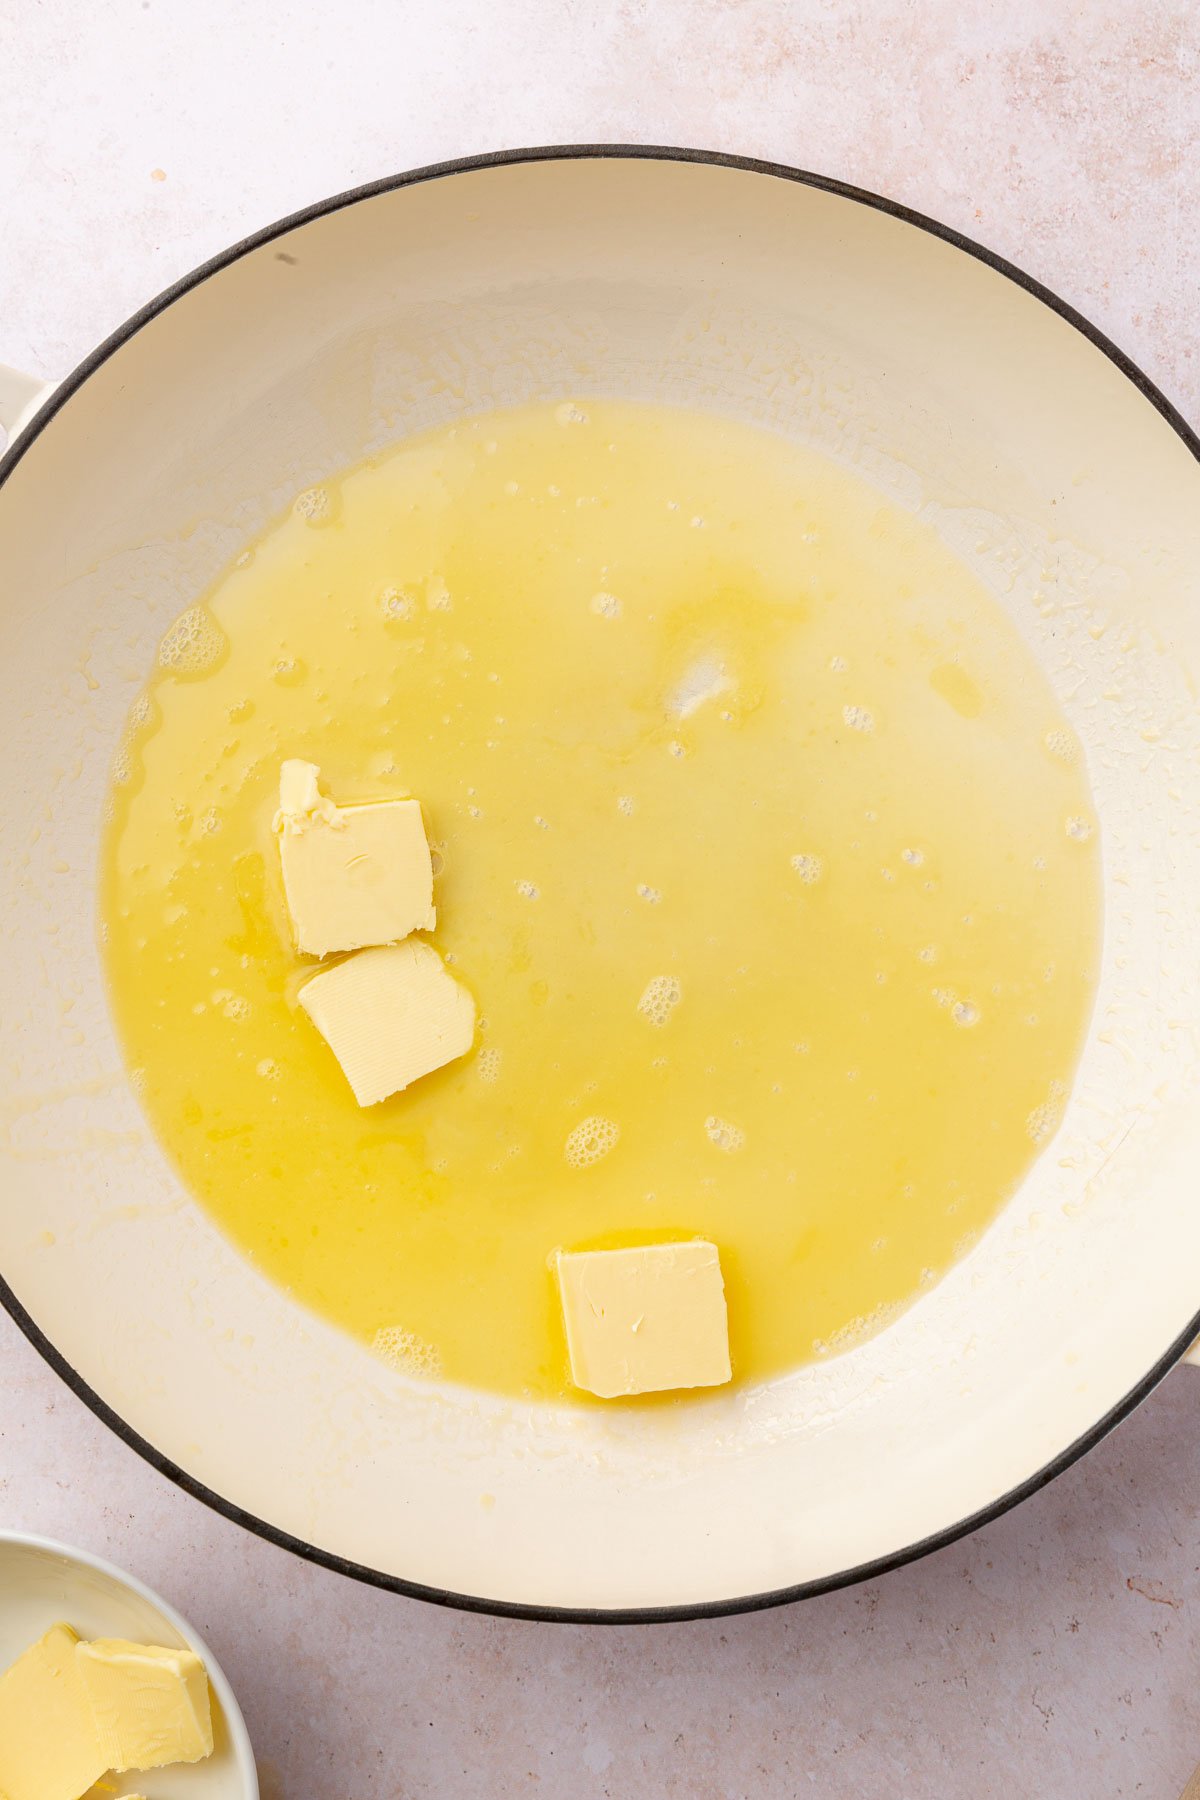 A braising pan with three tablespoons of butter that are partially melted.